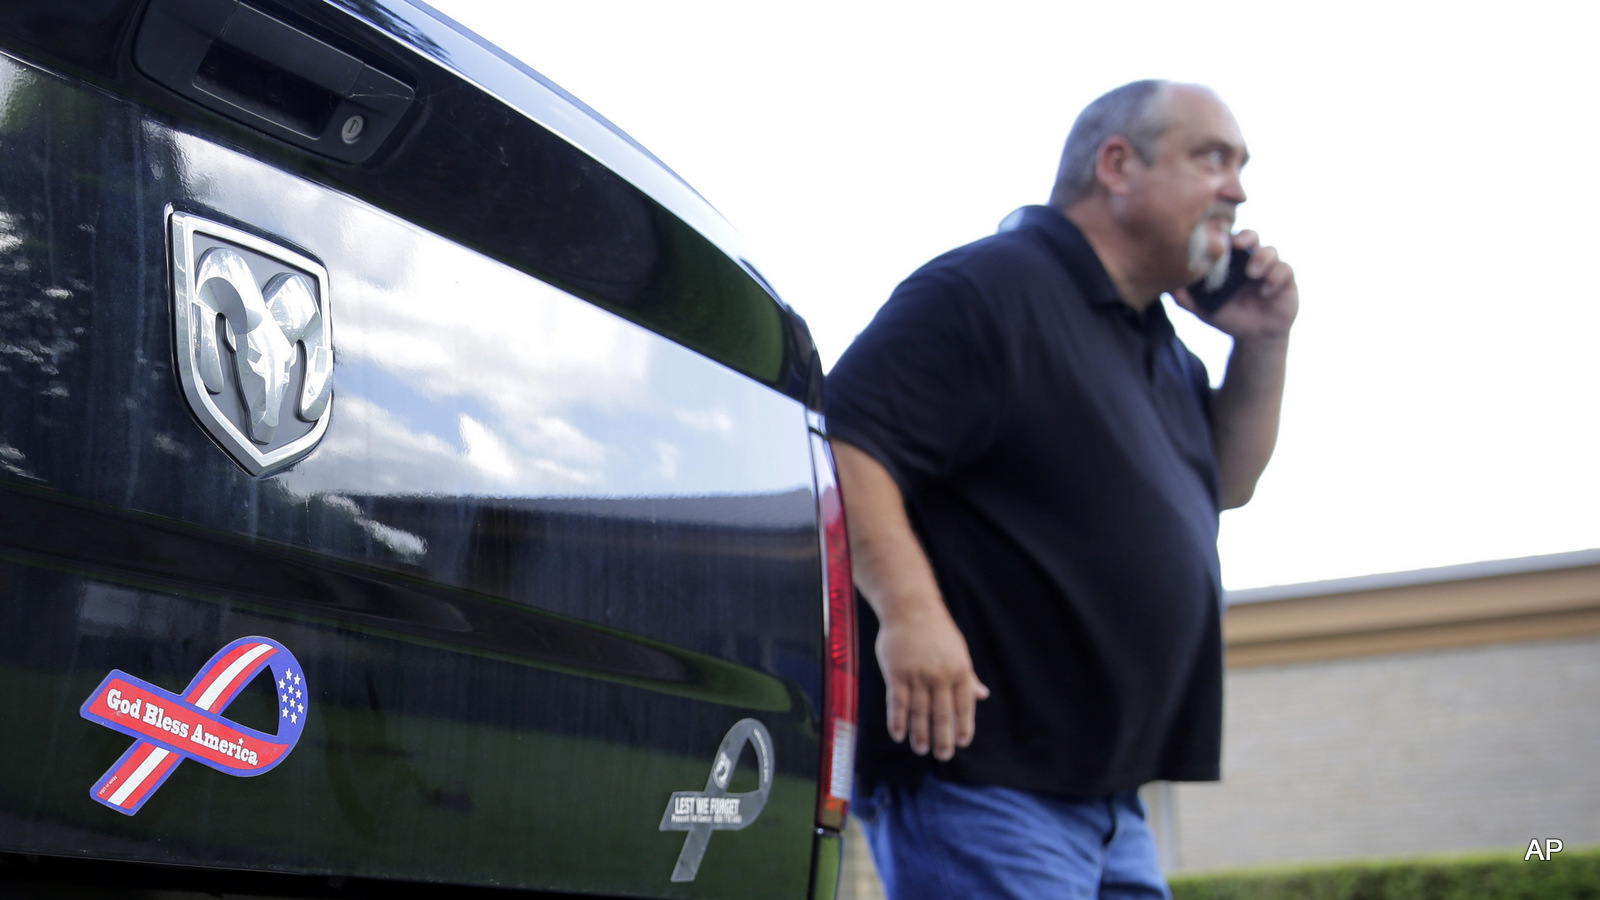 Eric Johnston, the Texas organizer for the civilian volunteer group monitoring Jade Helm 15 military training exercises, talks on the phone, Wednesday, July 15, 2015, in Bastrop, Texas.